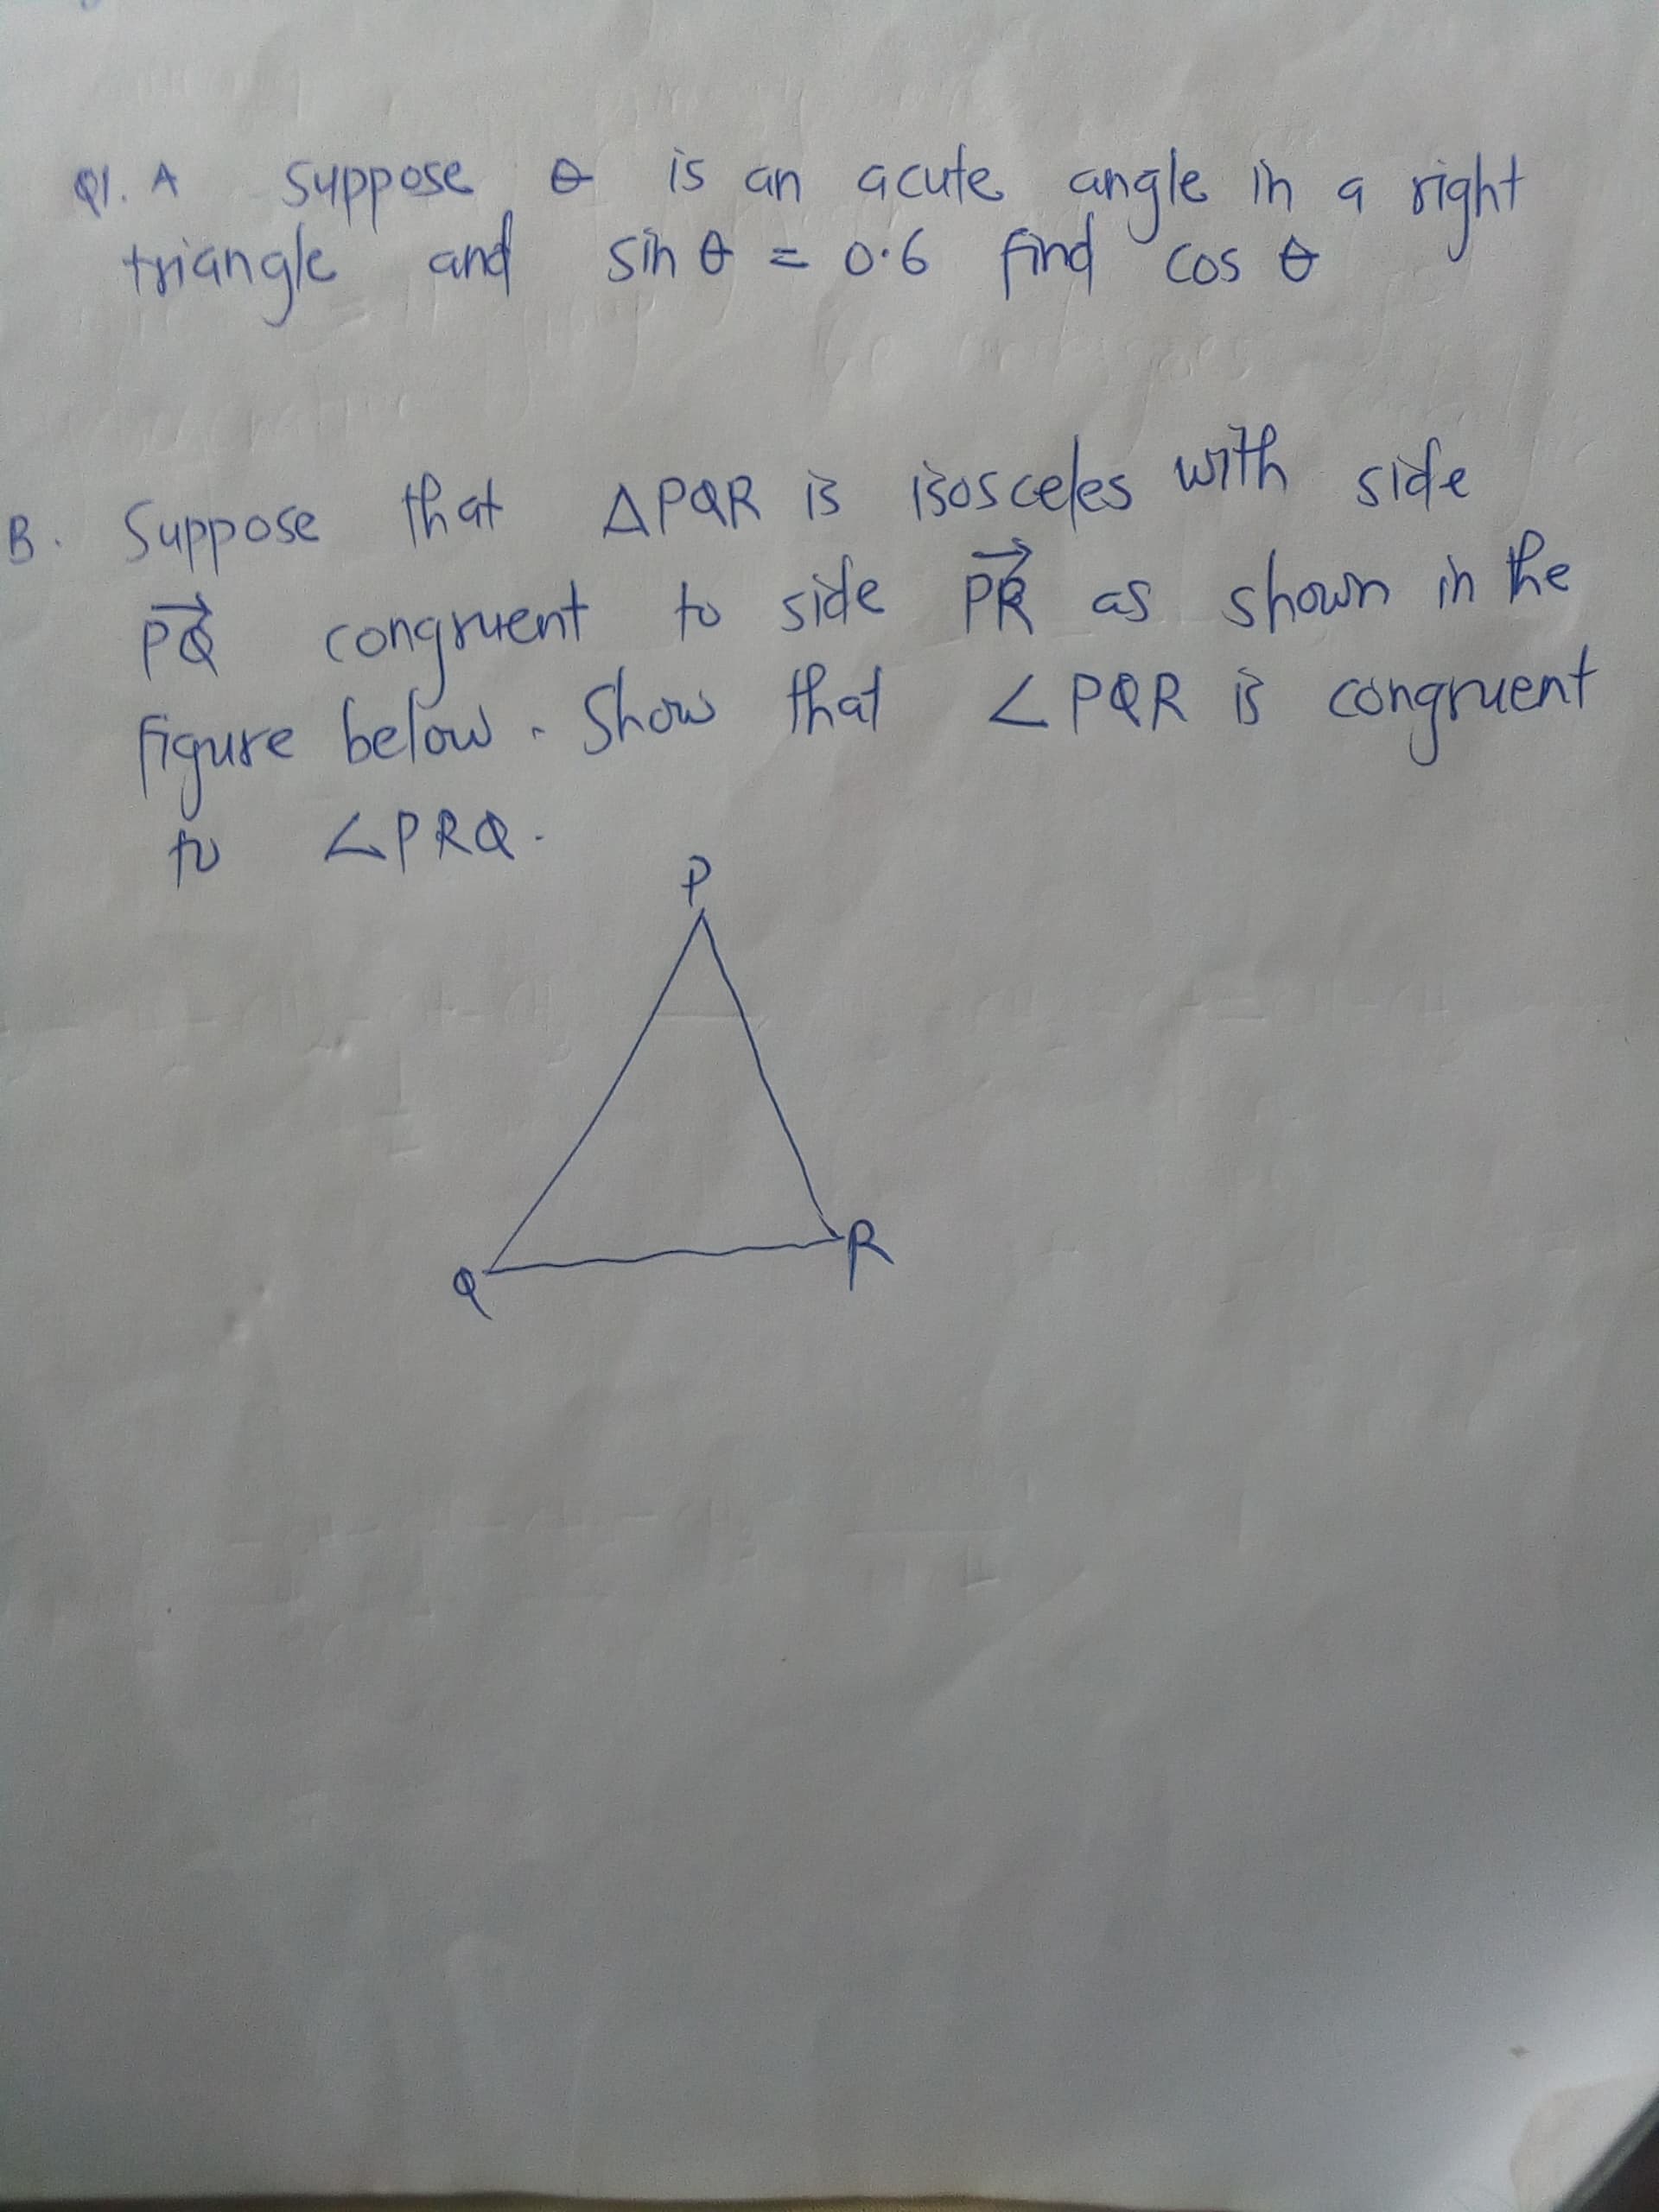 is an acute angle
right
e
. A
Suppose
in a
triangle and sih e = 0·6
find Cos
s &
